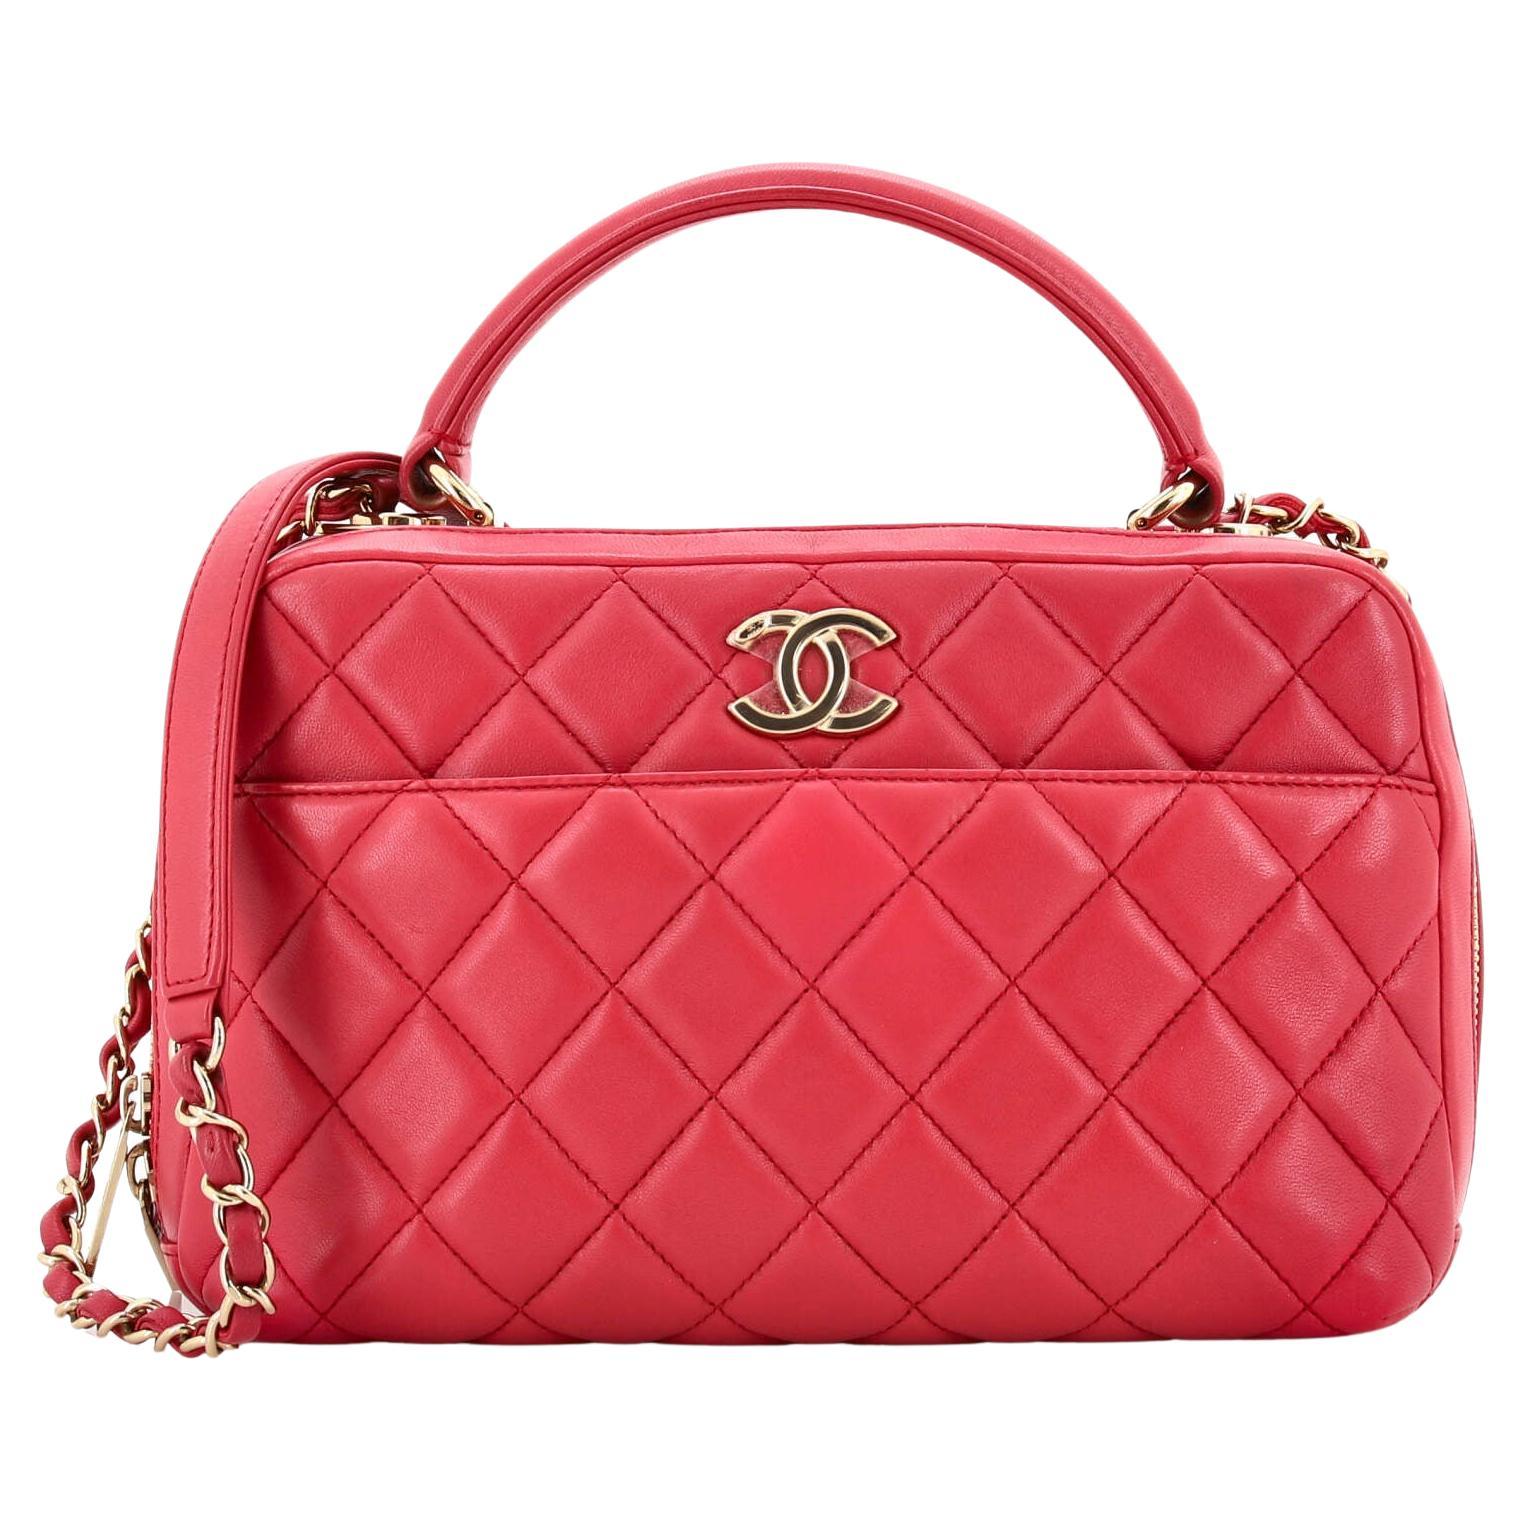 Chanel Pink Bowling - For Sale on 1stDibs  chanel pink bowling bag, sharon  pink bowling